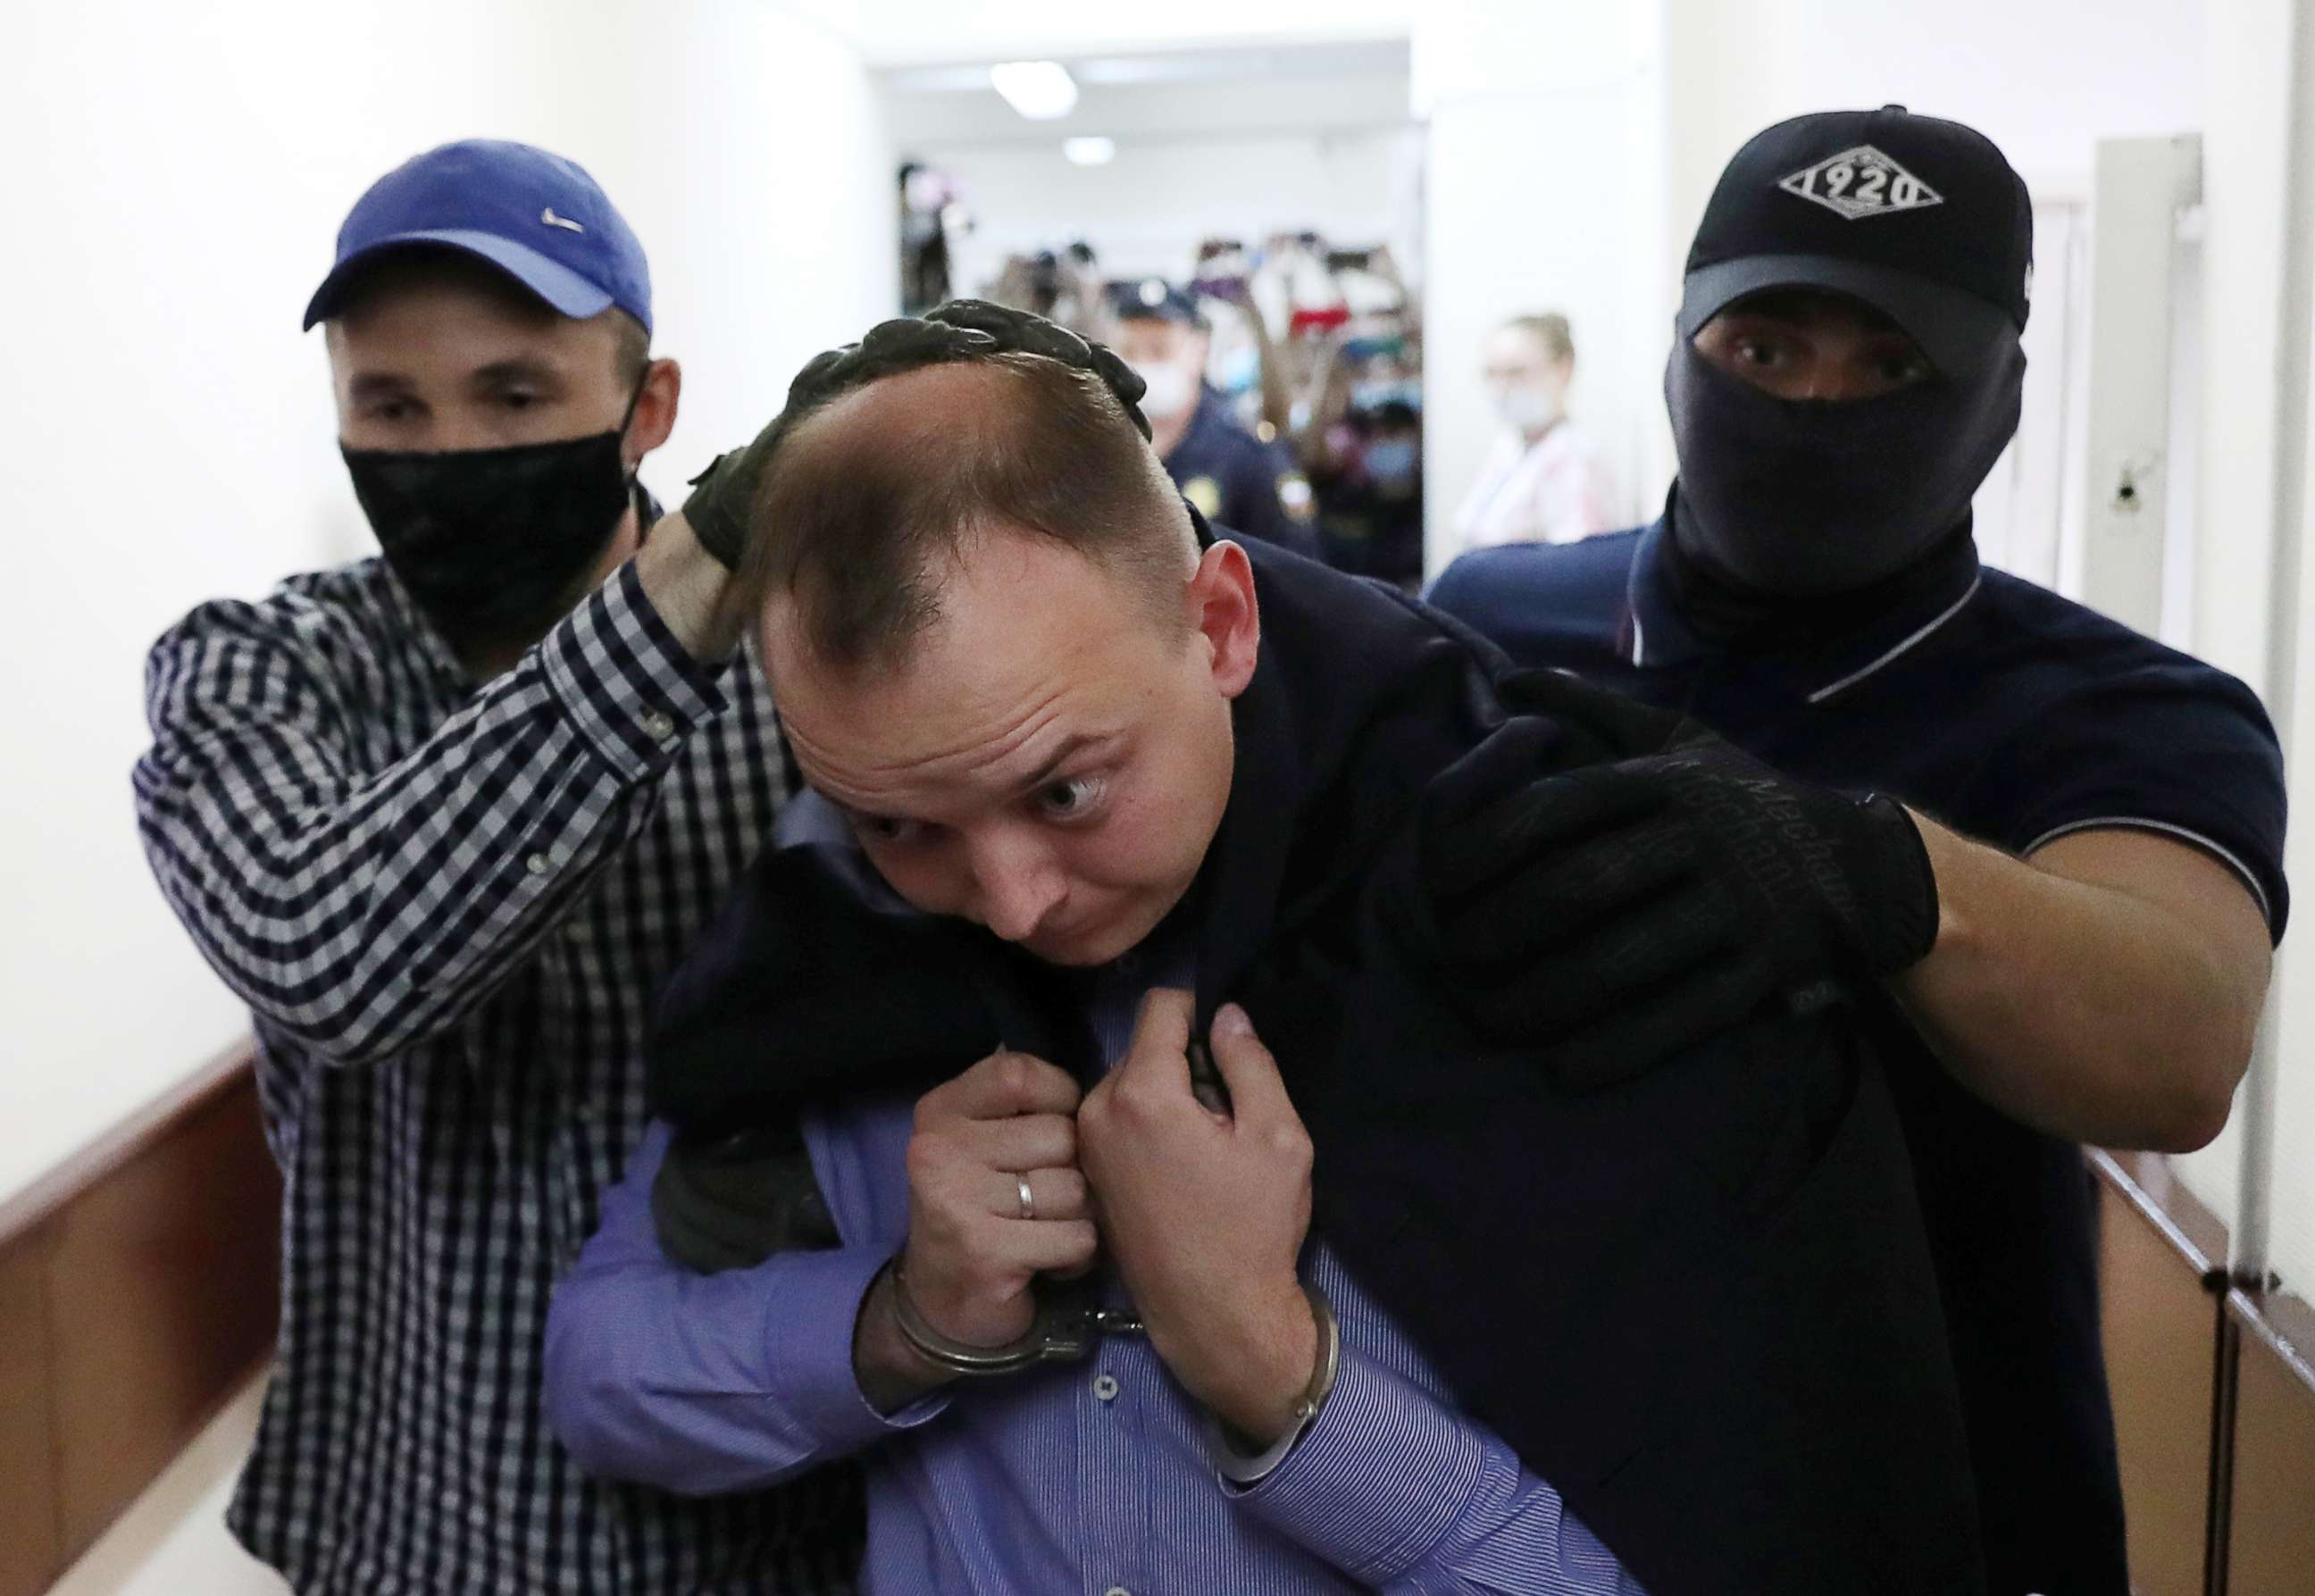 PHOTO: Ivan Safronov, a former journalist who works as an aide to the head of Russia's space agency Roscosmos, detained on suspicion of treason is escorted before a court hearing in Moscow, Russia July 7, 2020. REUTERS/Evgenia Novozhenina